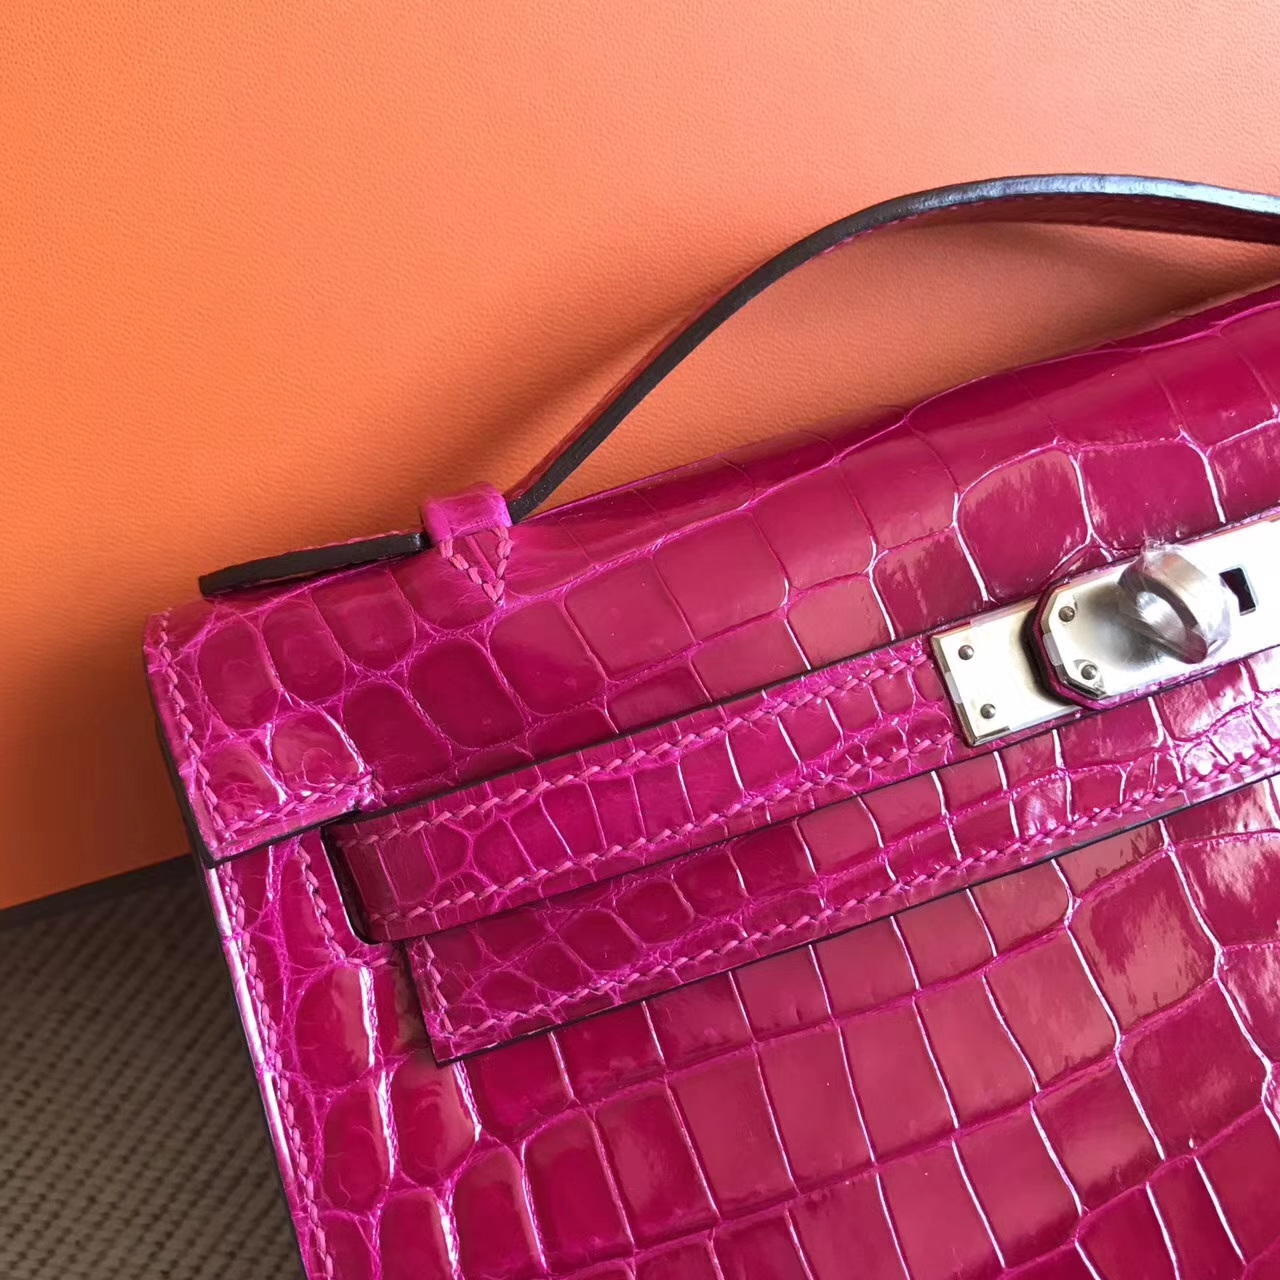 New Pretty Hermes Hot Pink Shiny Crocodile Leather Minikelly Bag22cm